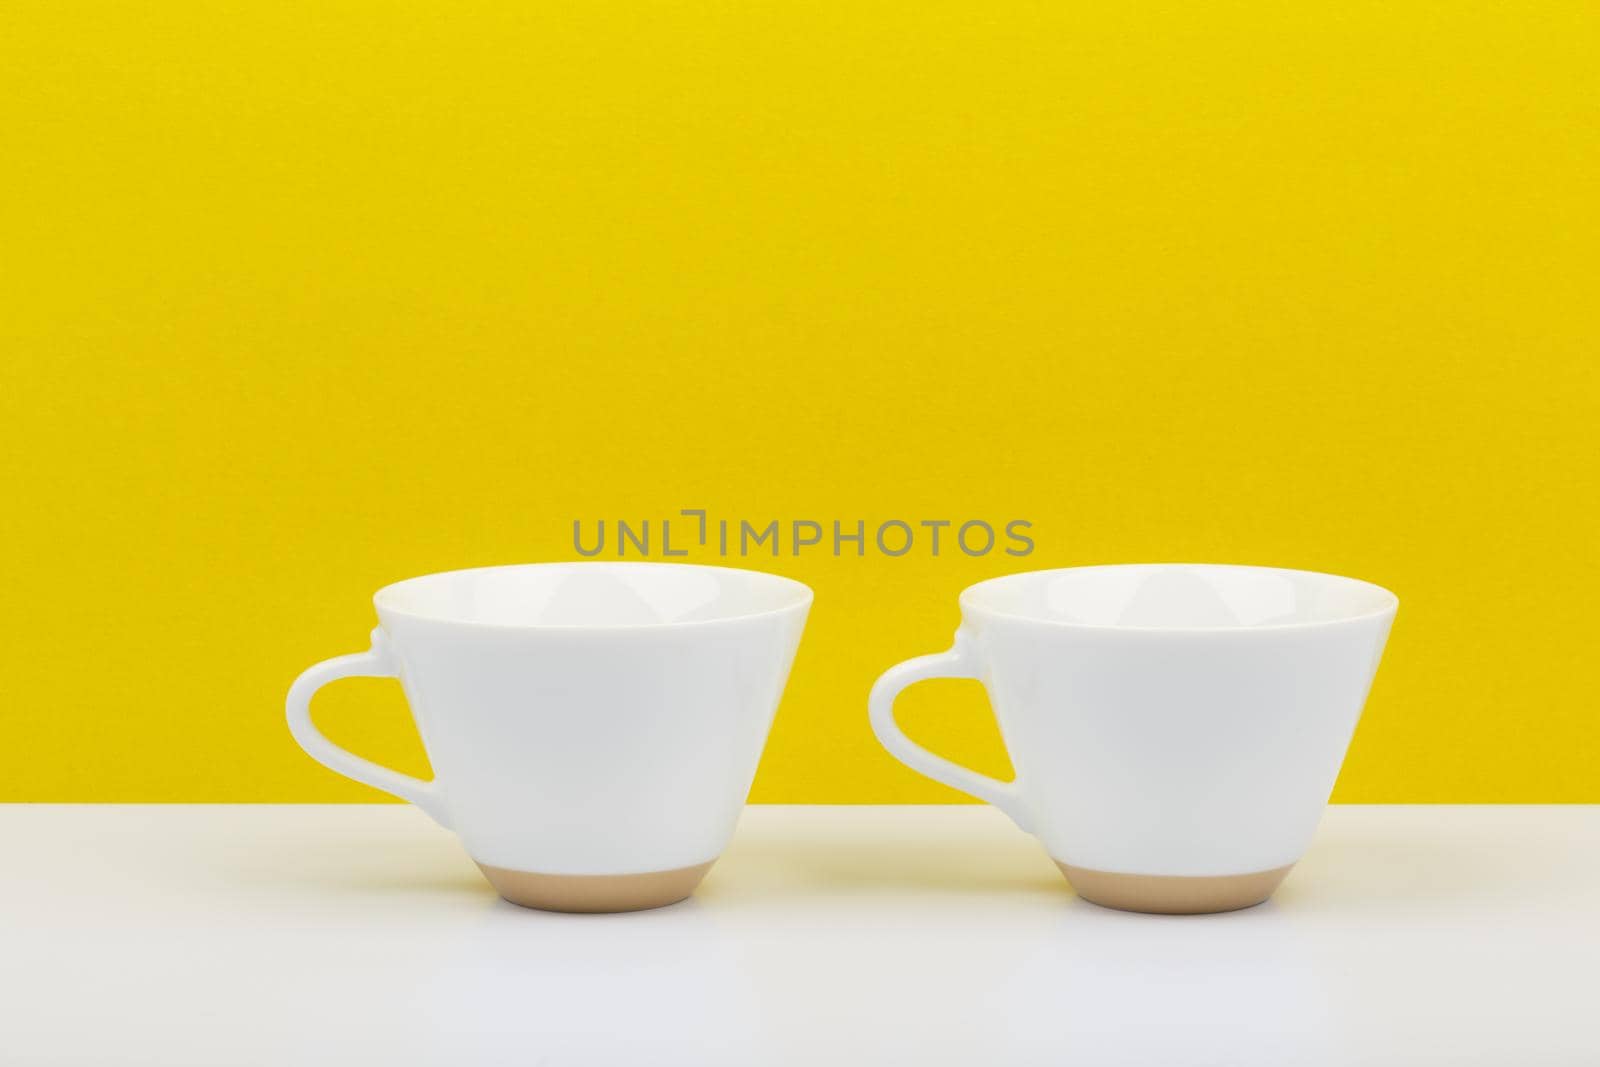 Two white glossy ceramic cups on white table against bright yellow background by Senorina_Irina